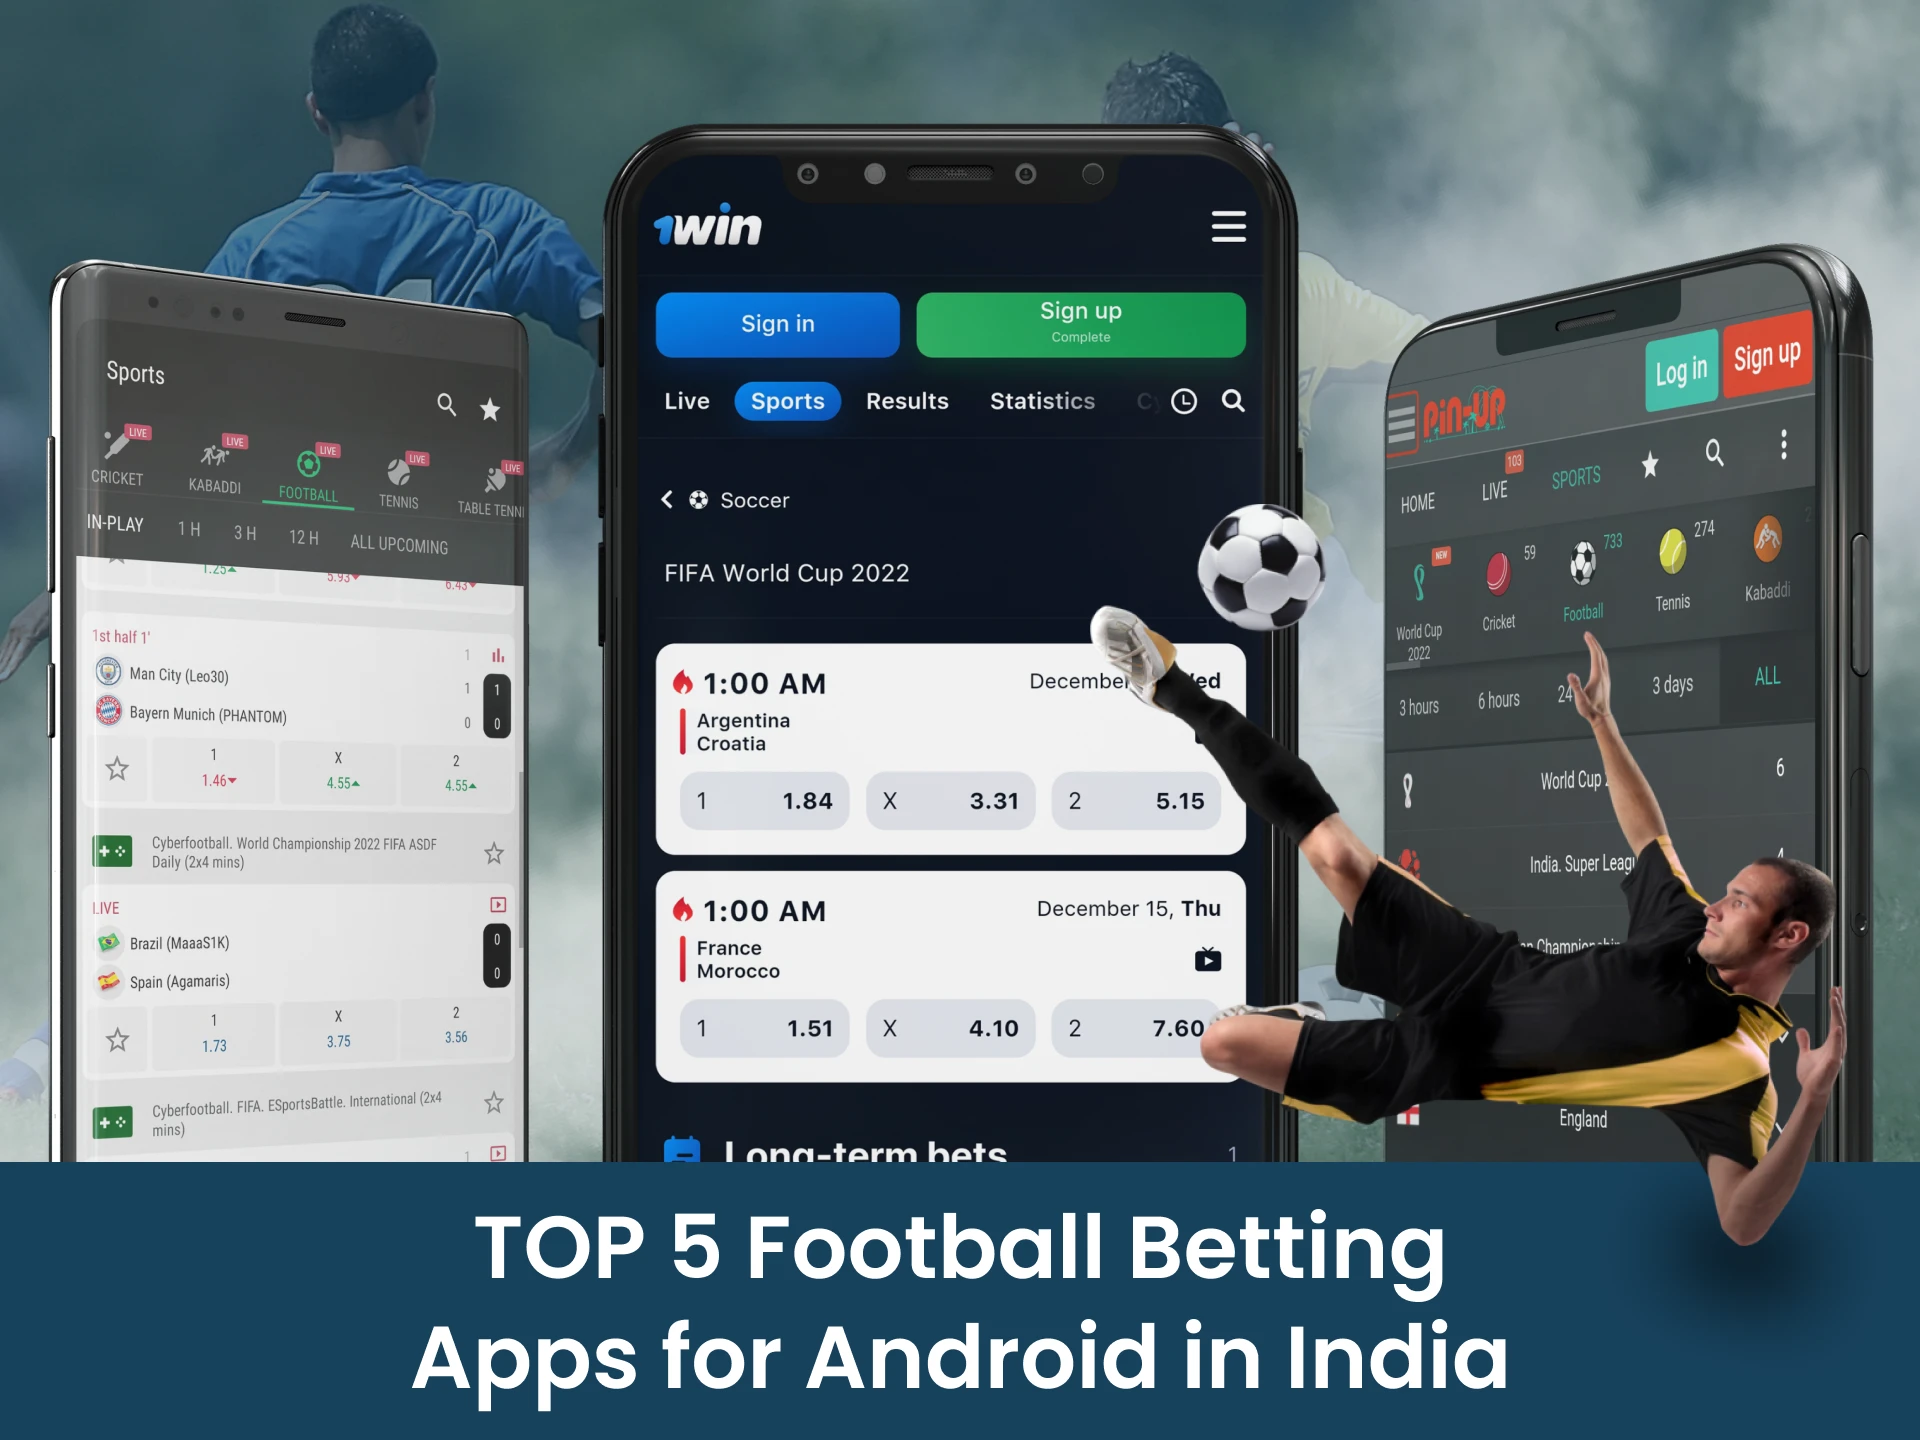 These apps are the best for betting from the Android smartphone.